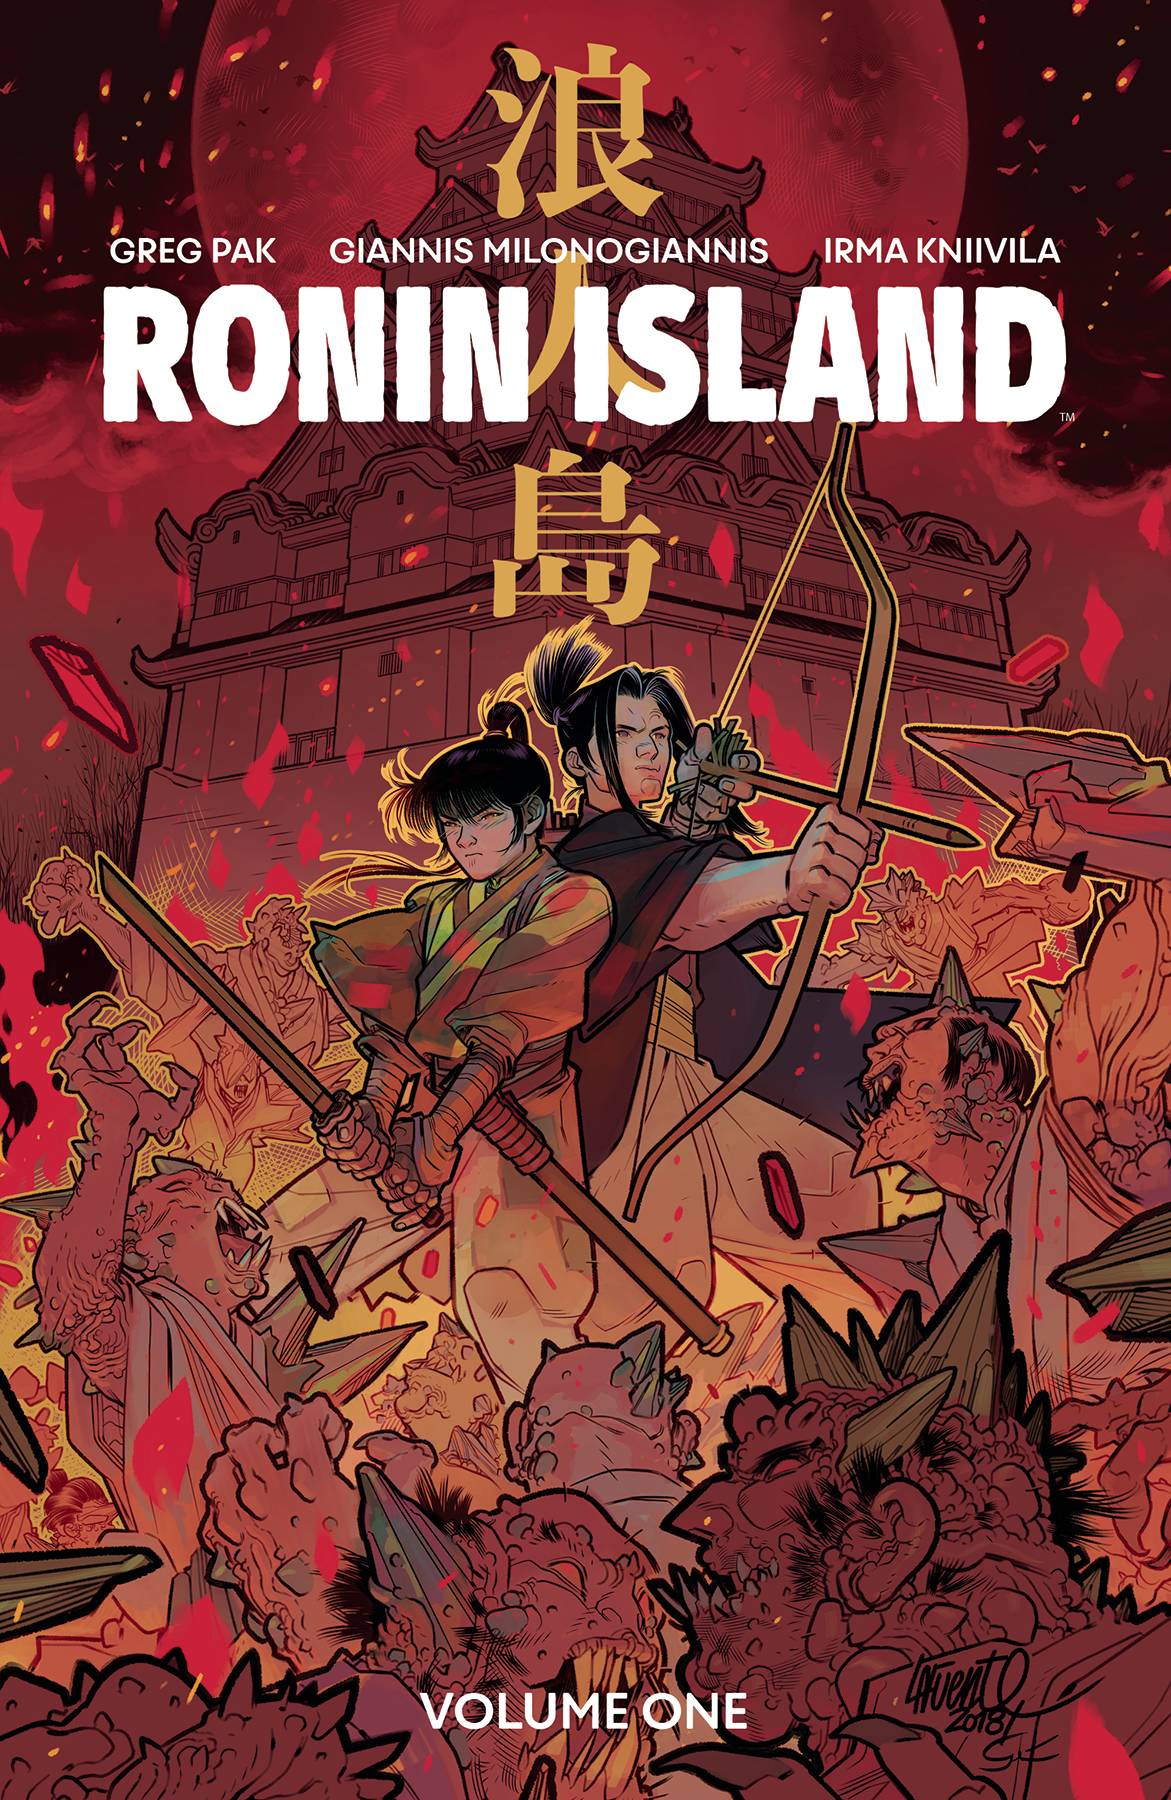 Ronin Island Graphic Novel Volume 1 Px Discover Now Edition